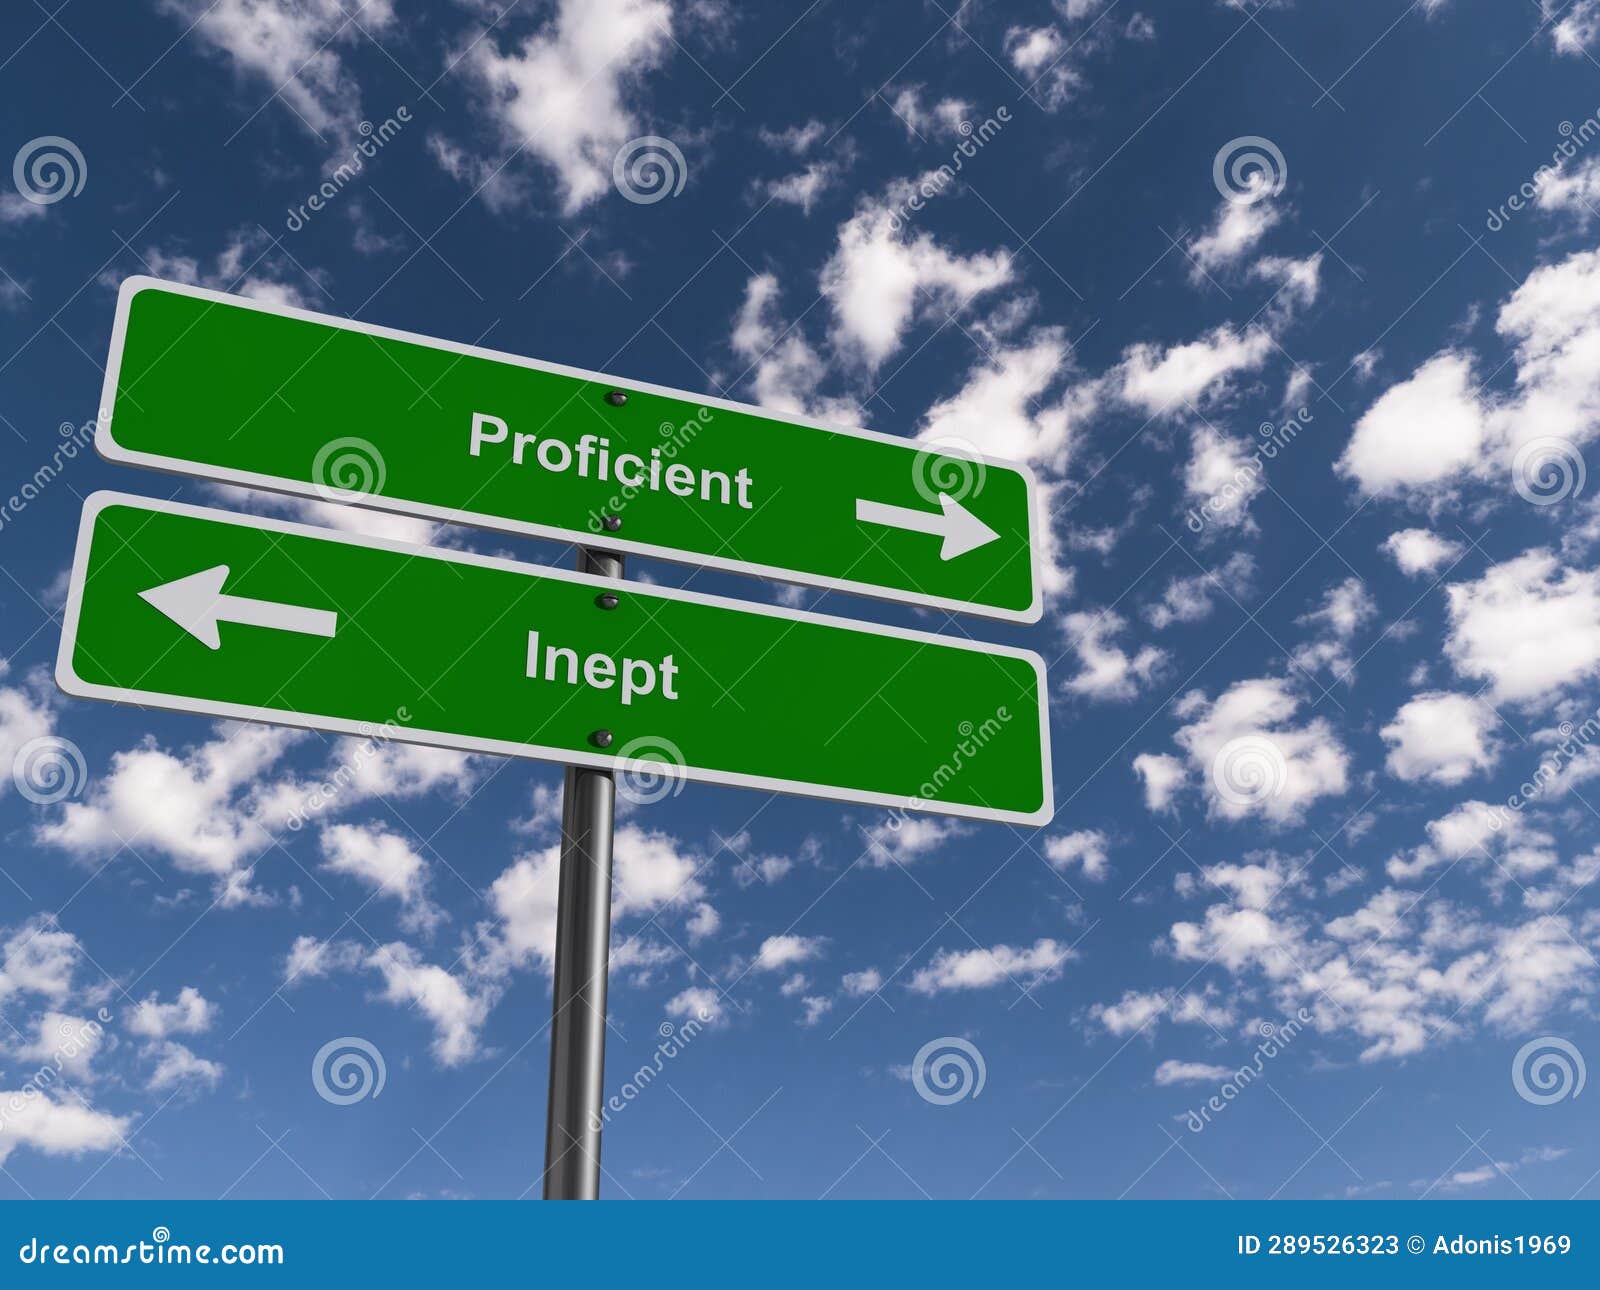 proficient - inept traffic sign on blue sky